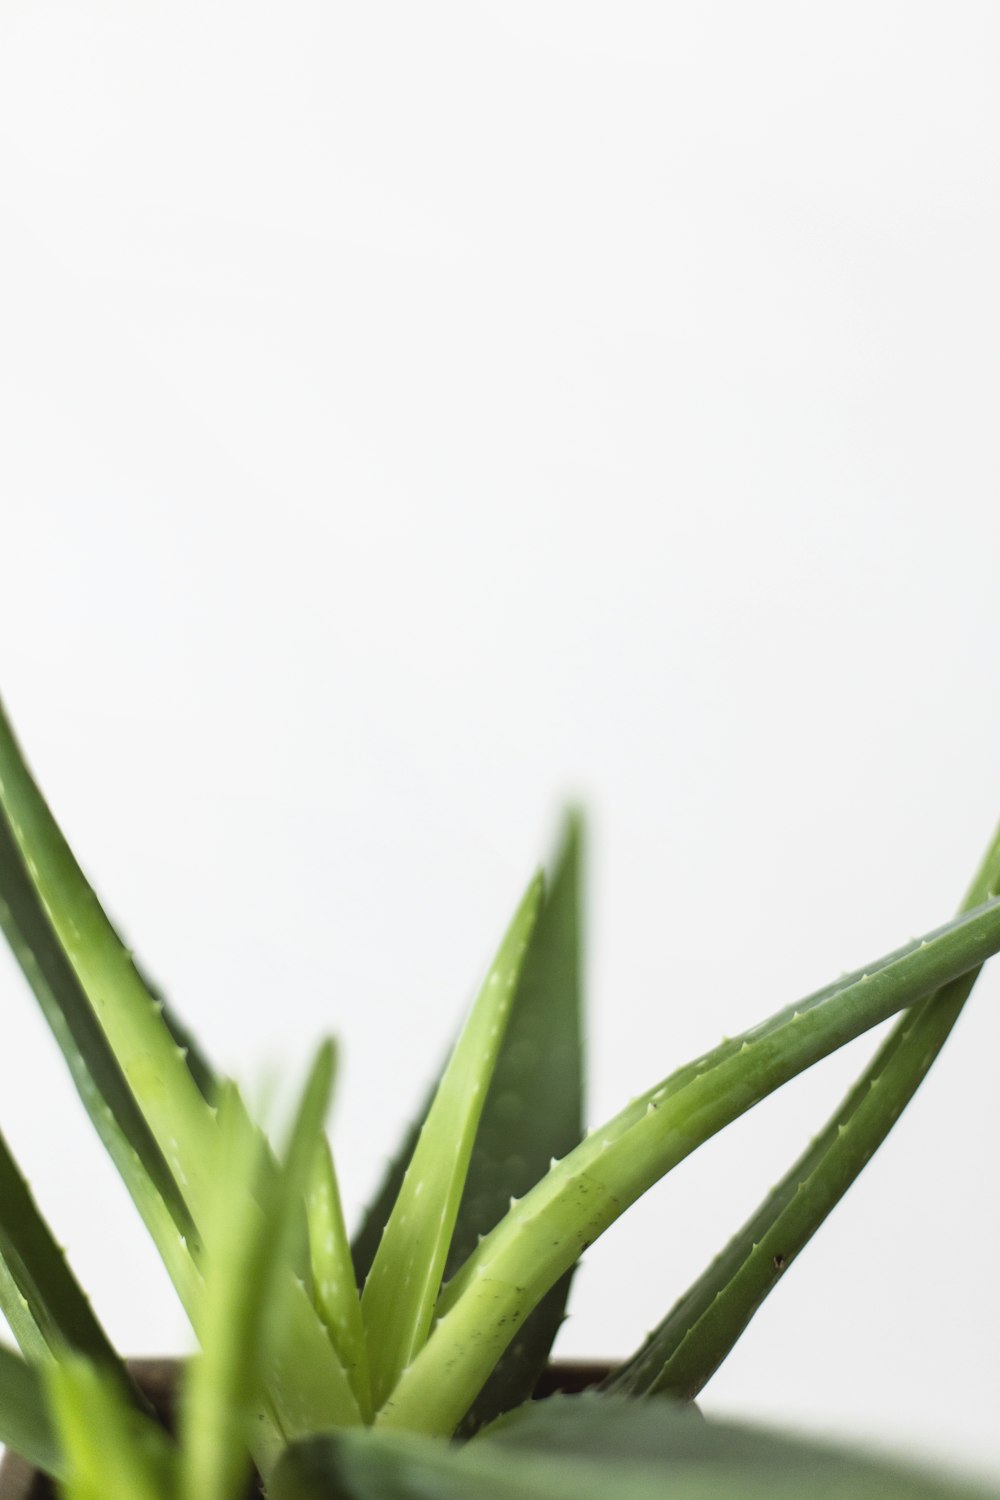 100+ Aloe Vera Pictures [HD] | Download Free Images on Unsplash